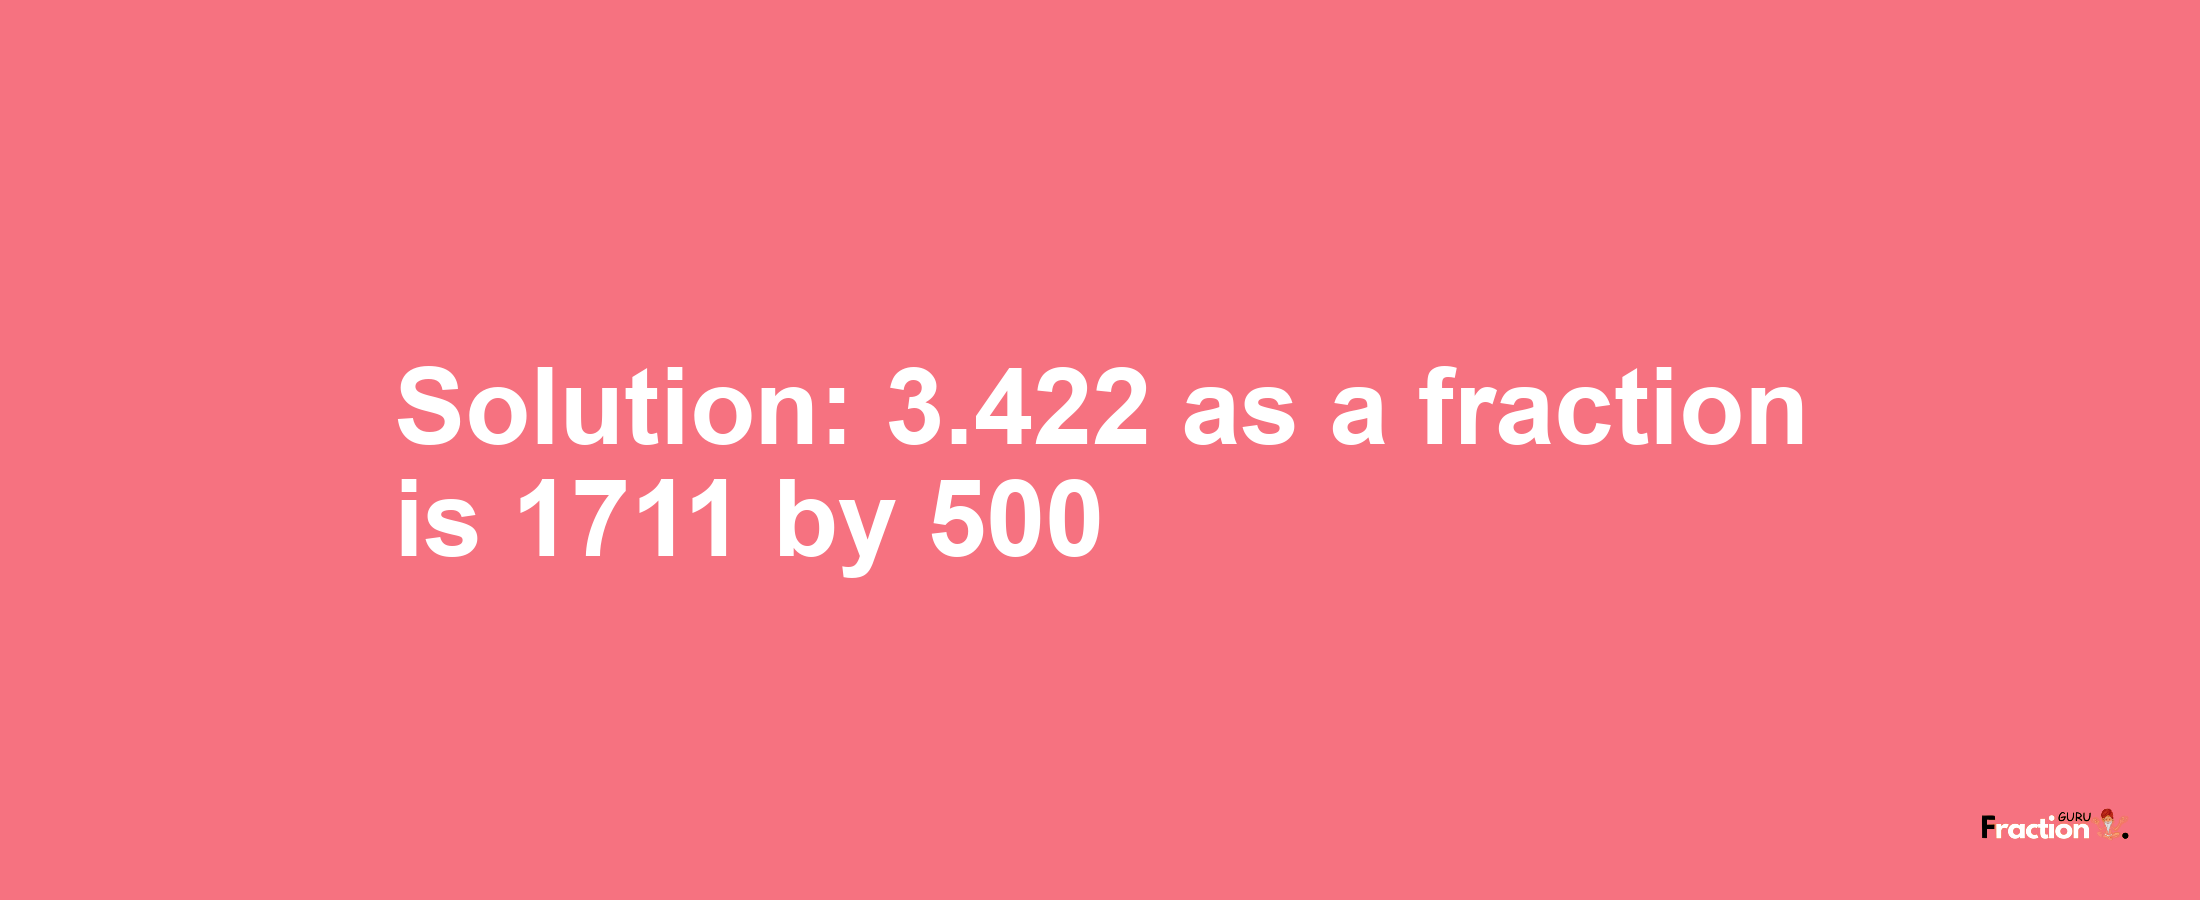 Solution:3.422 as a fraction is 1711/500